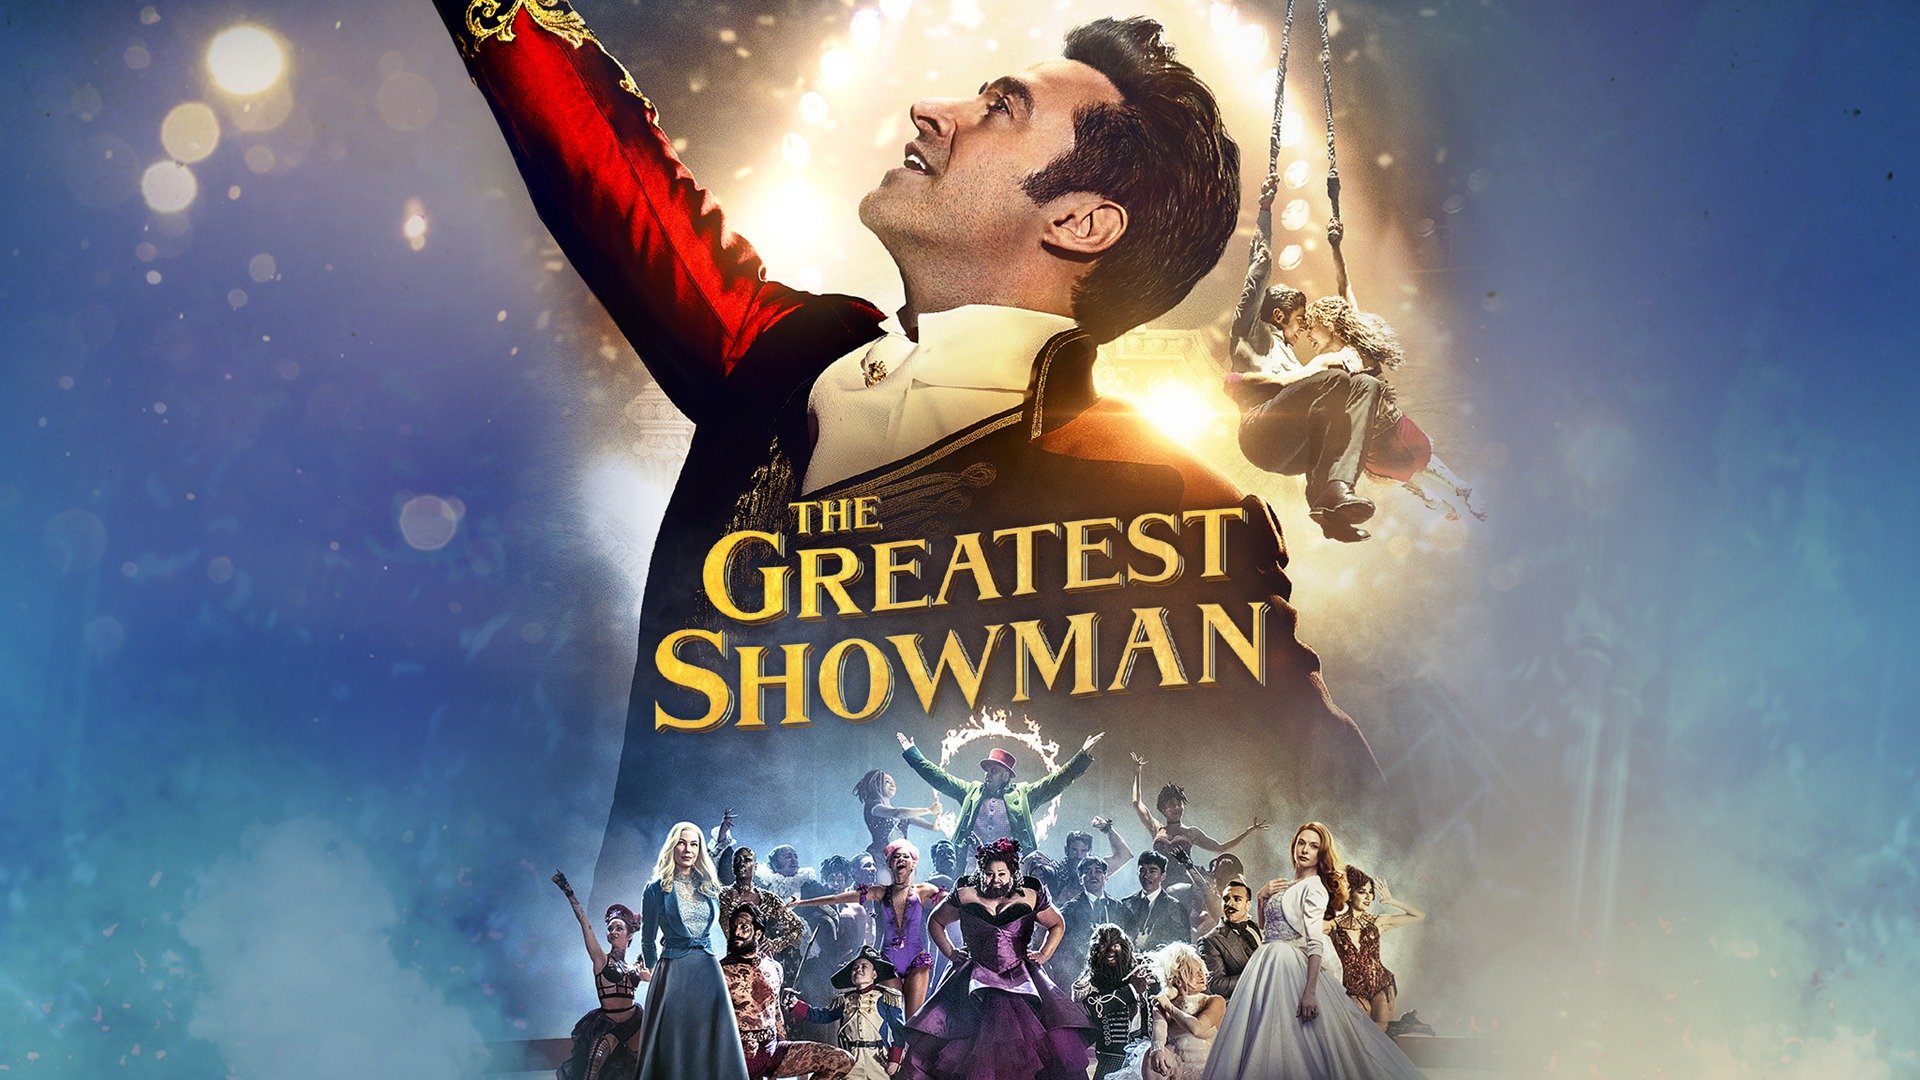 The Greatest Showman Movietickets Zac efron hopes there's a greatest s...